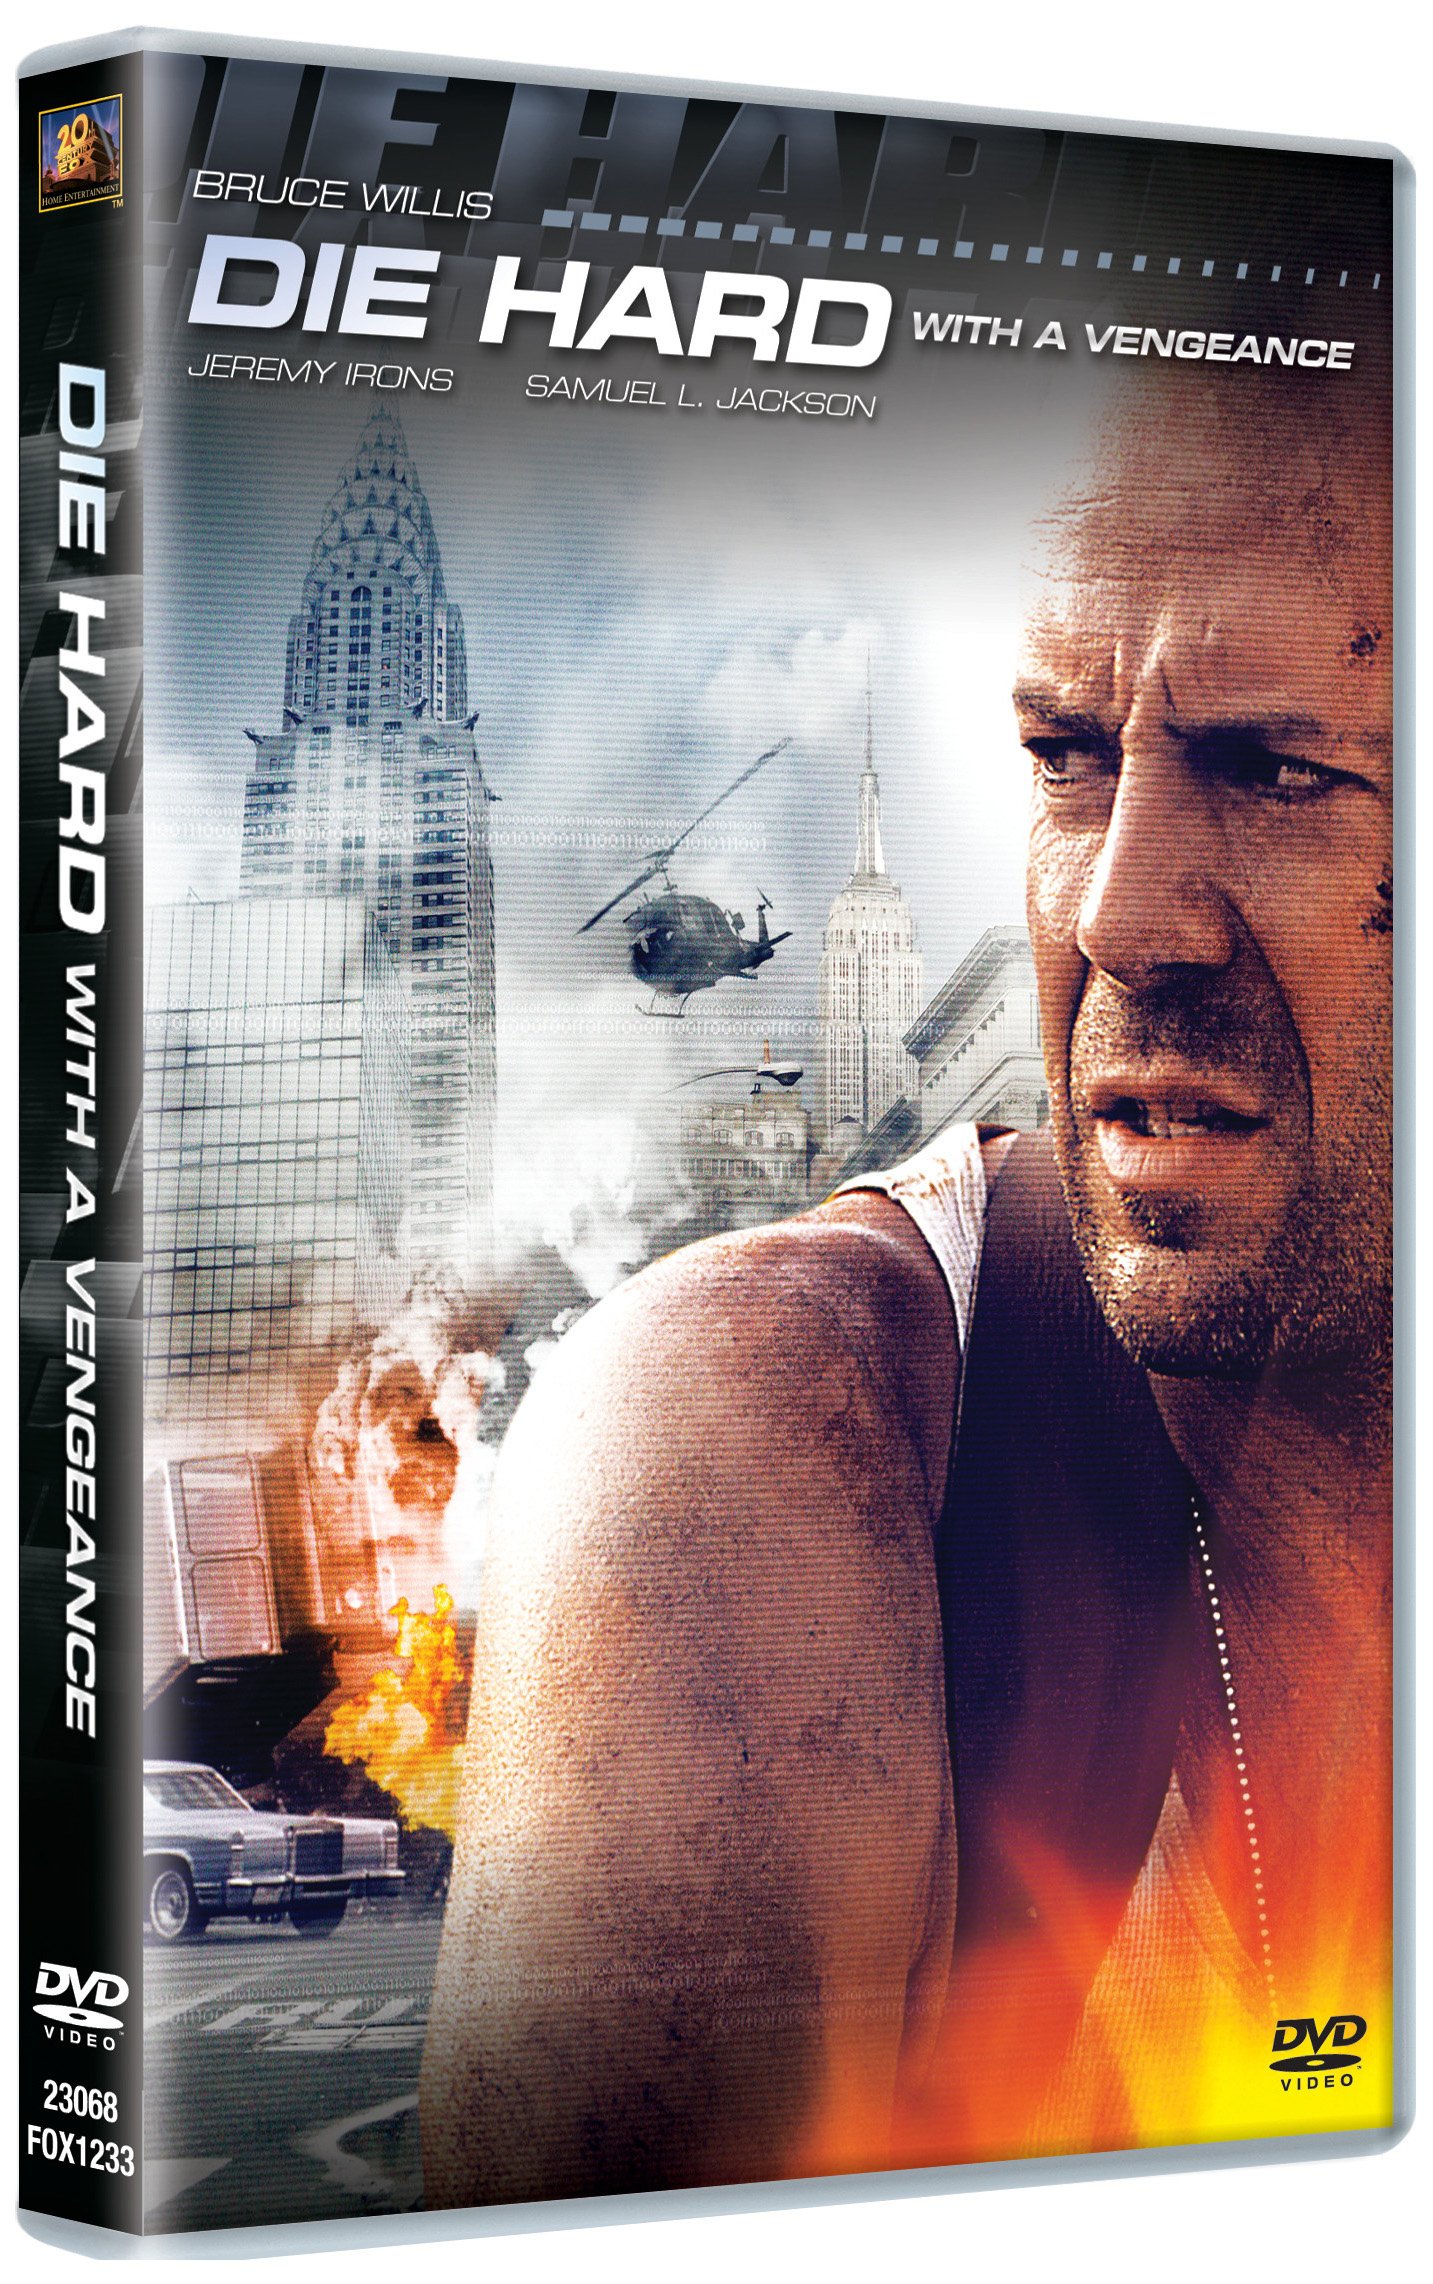 die-hard-with-a-vengeance-movie-purchase-or-watch-online